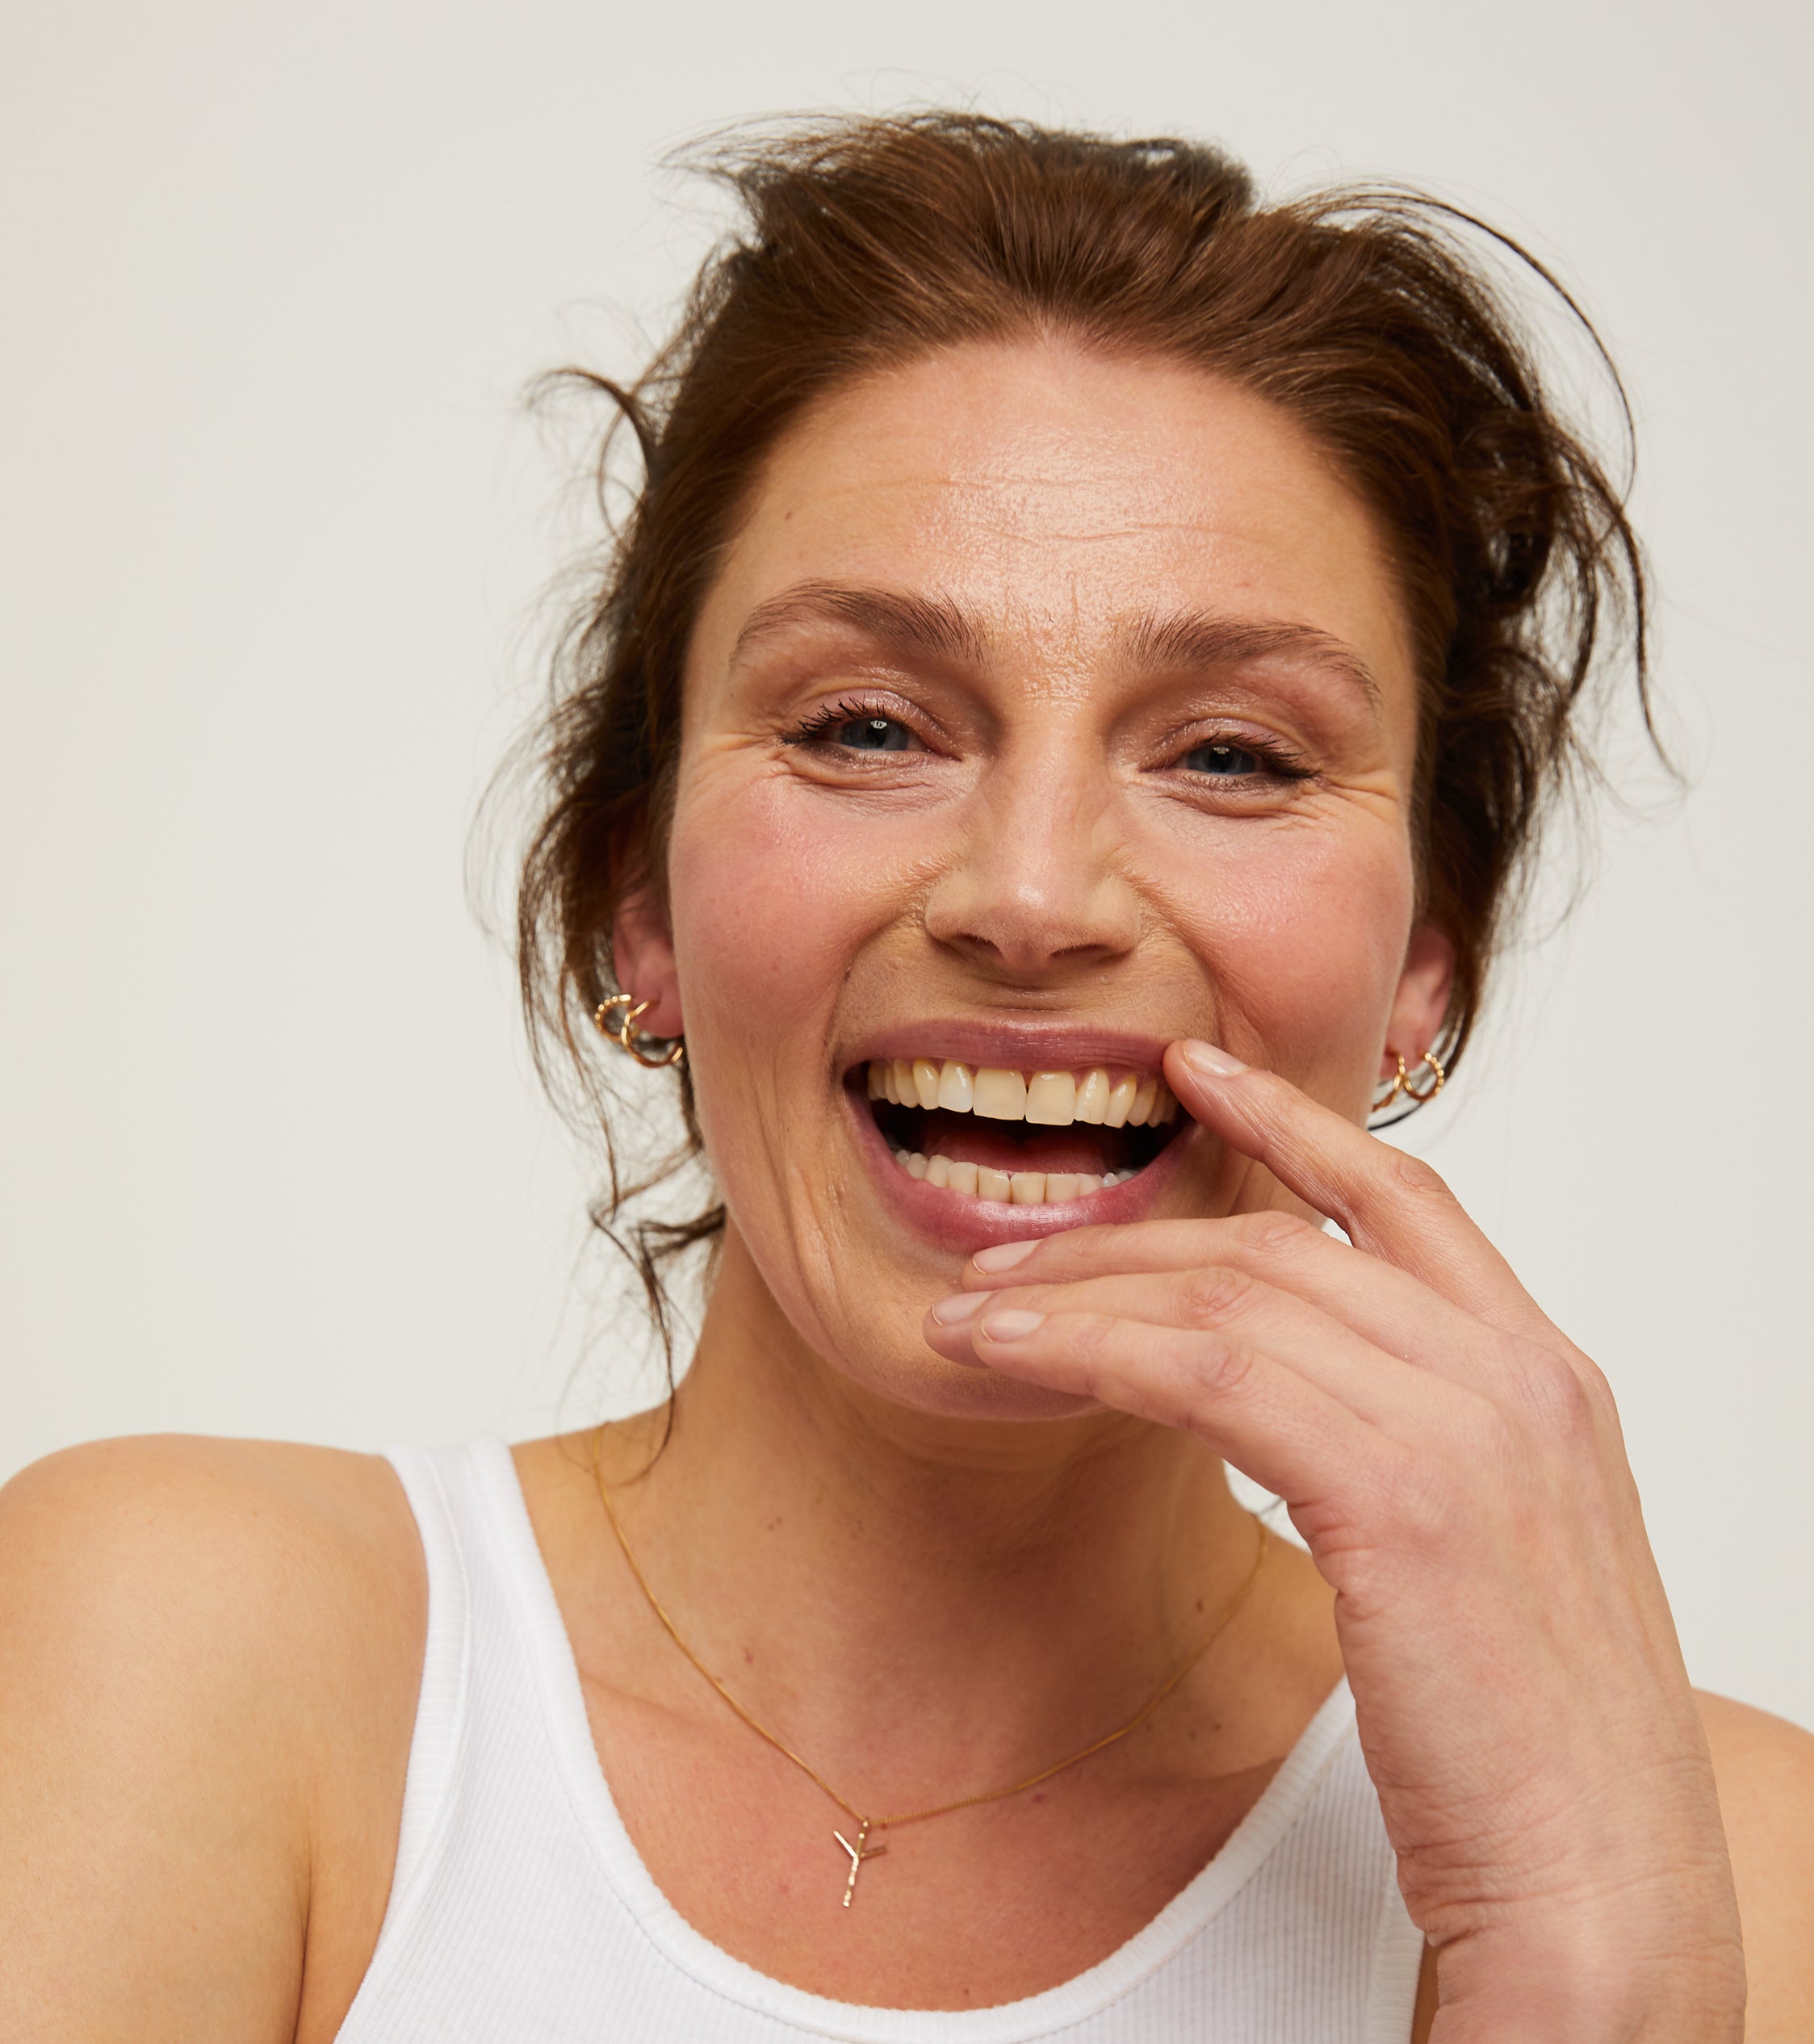 Woman smiling with fingers over mouth